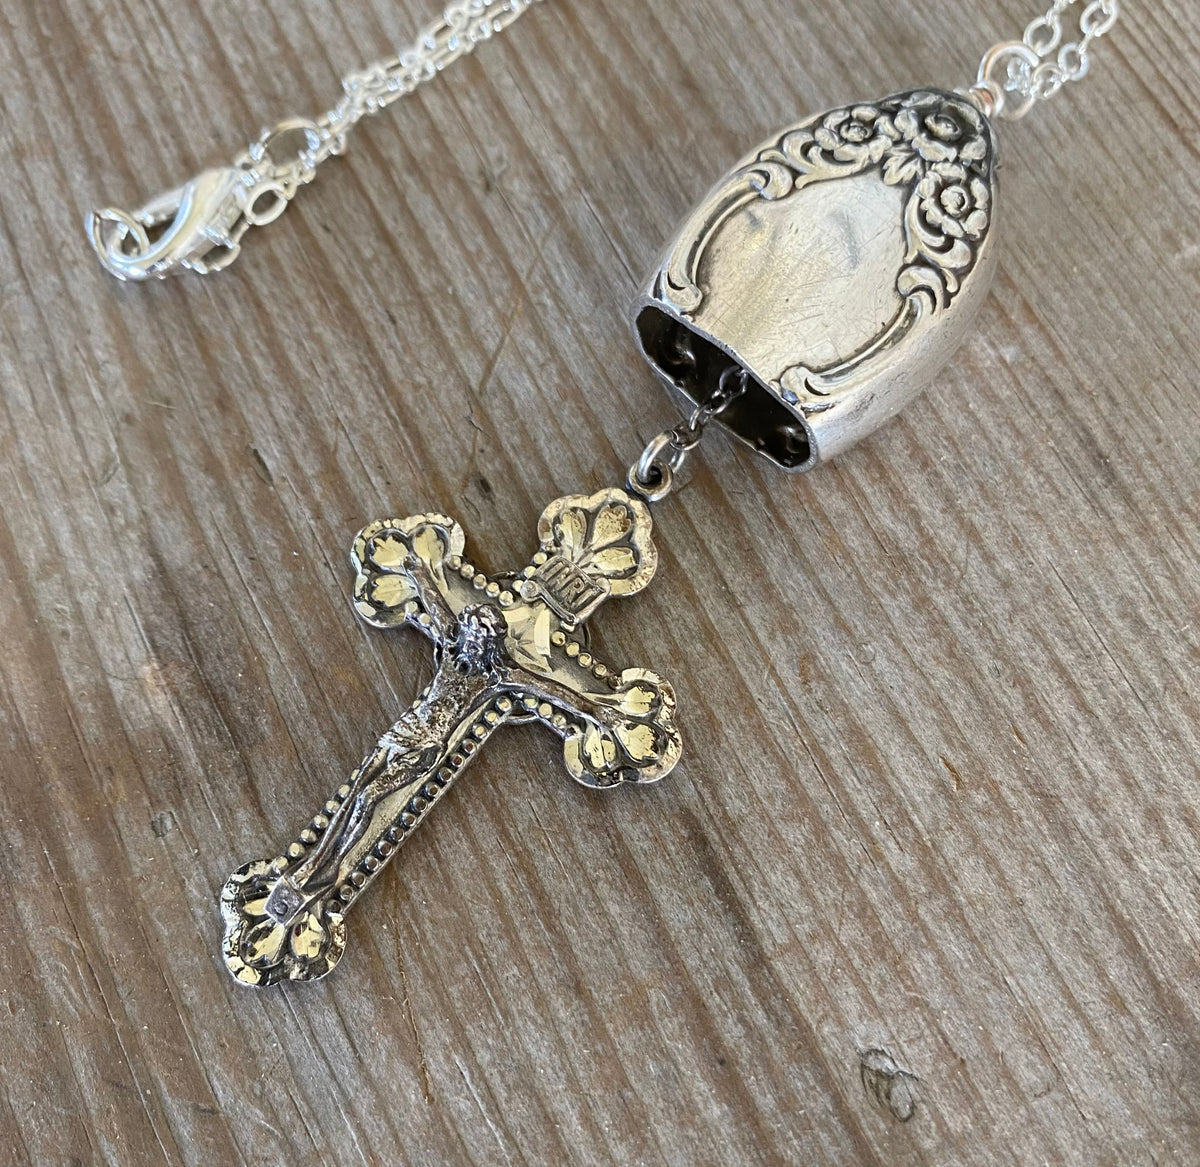 Spoon Cross Necklace - #5529 – Laughing Frog Studio